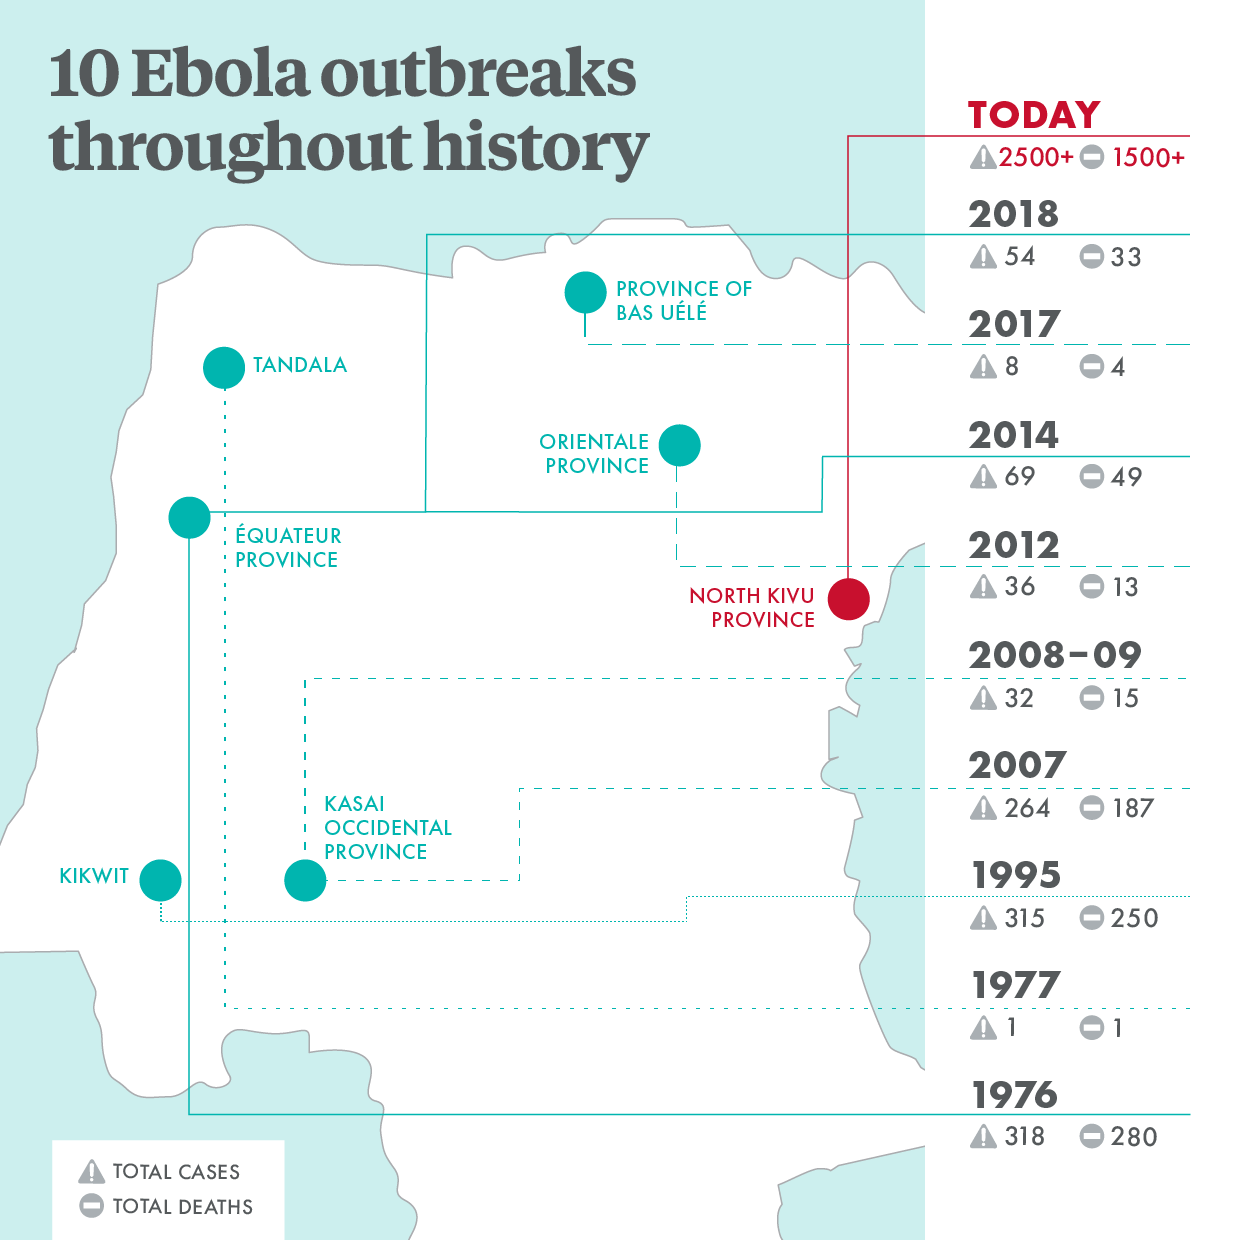 10 Ebola outbreaks throughout history (1976-today). The current outbreak has resulted in more than 2,500 cases and more than 1,500 deaths.